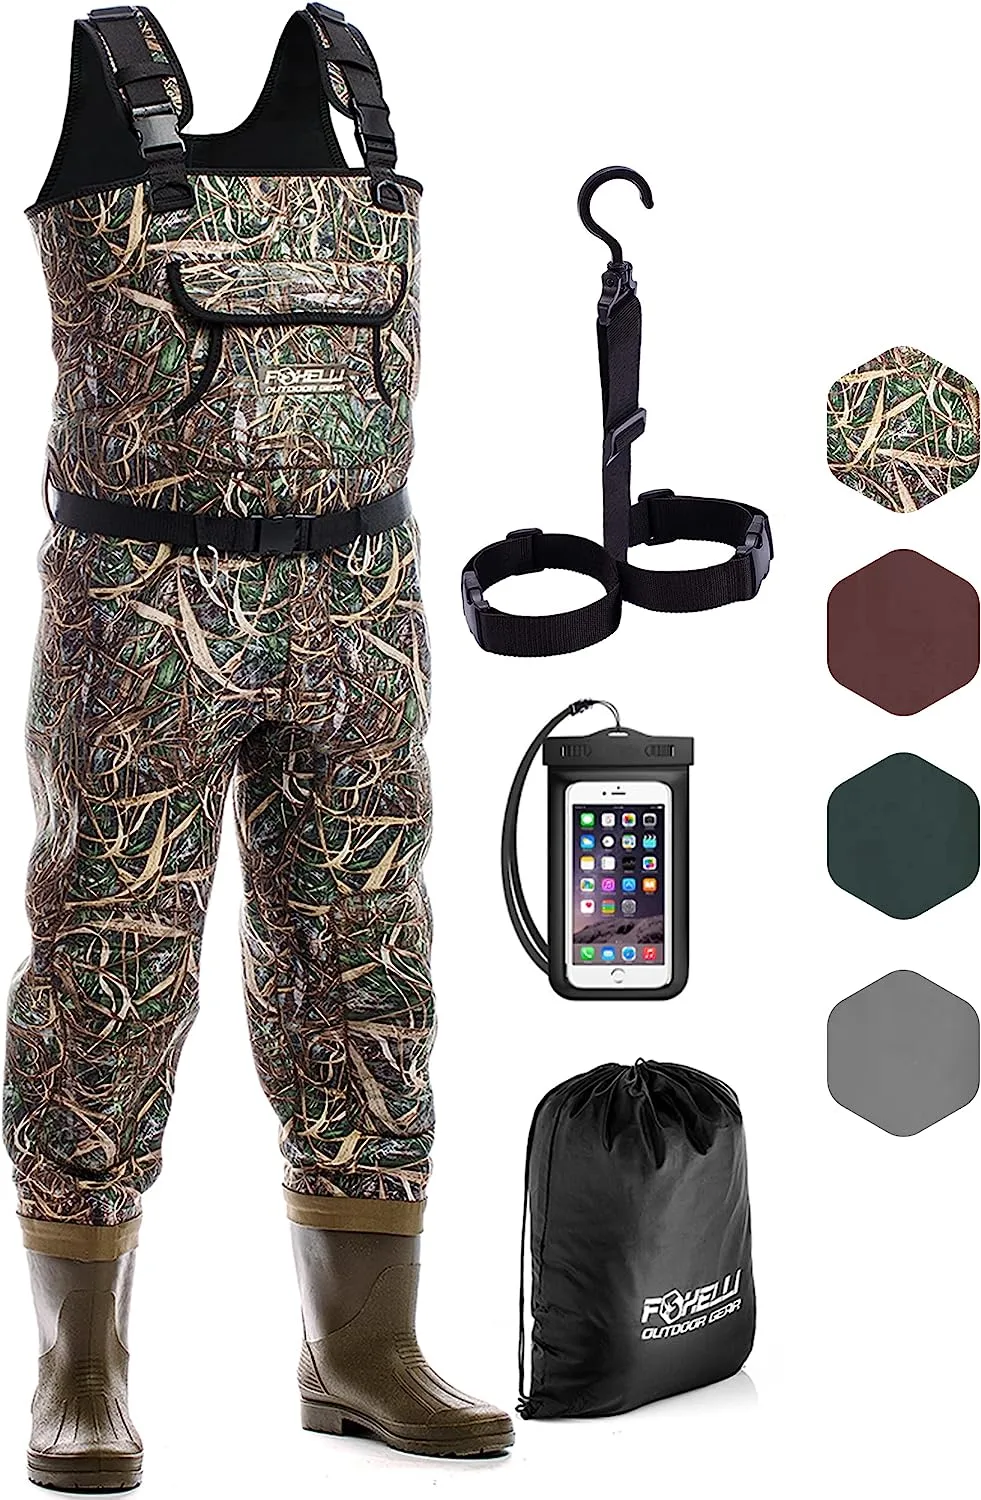 Foxelli Neoprene Chest Waders - Camo Hunting & Fishing Waders for Men & Women with Boots, Waterproof Bootfoot Waders